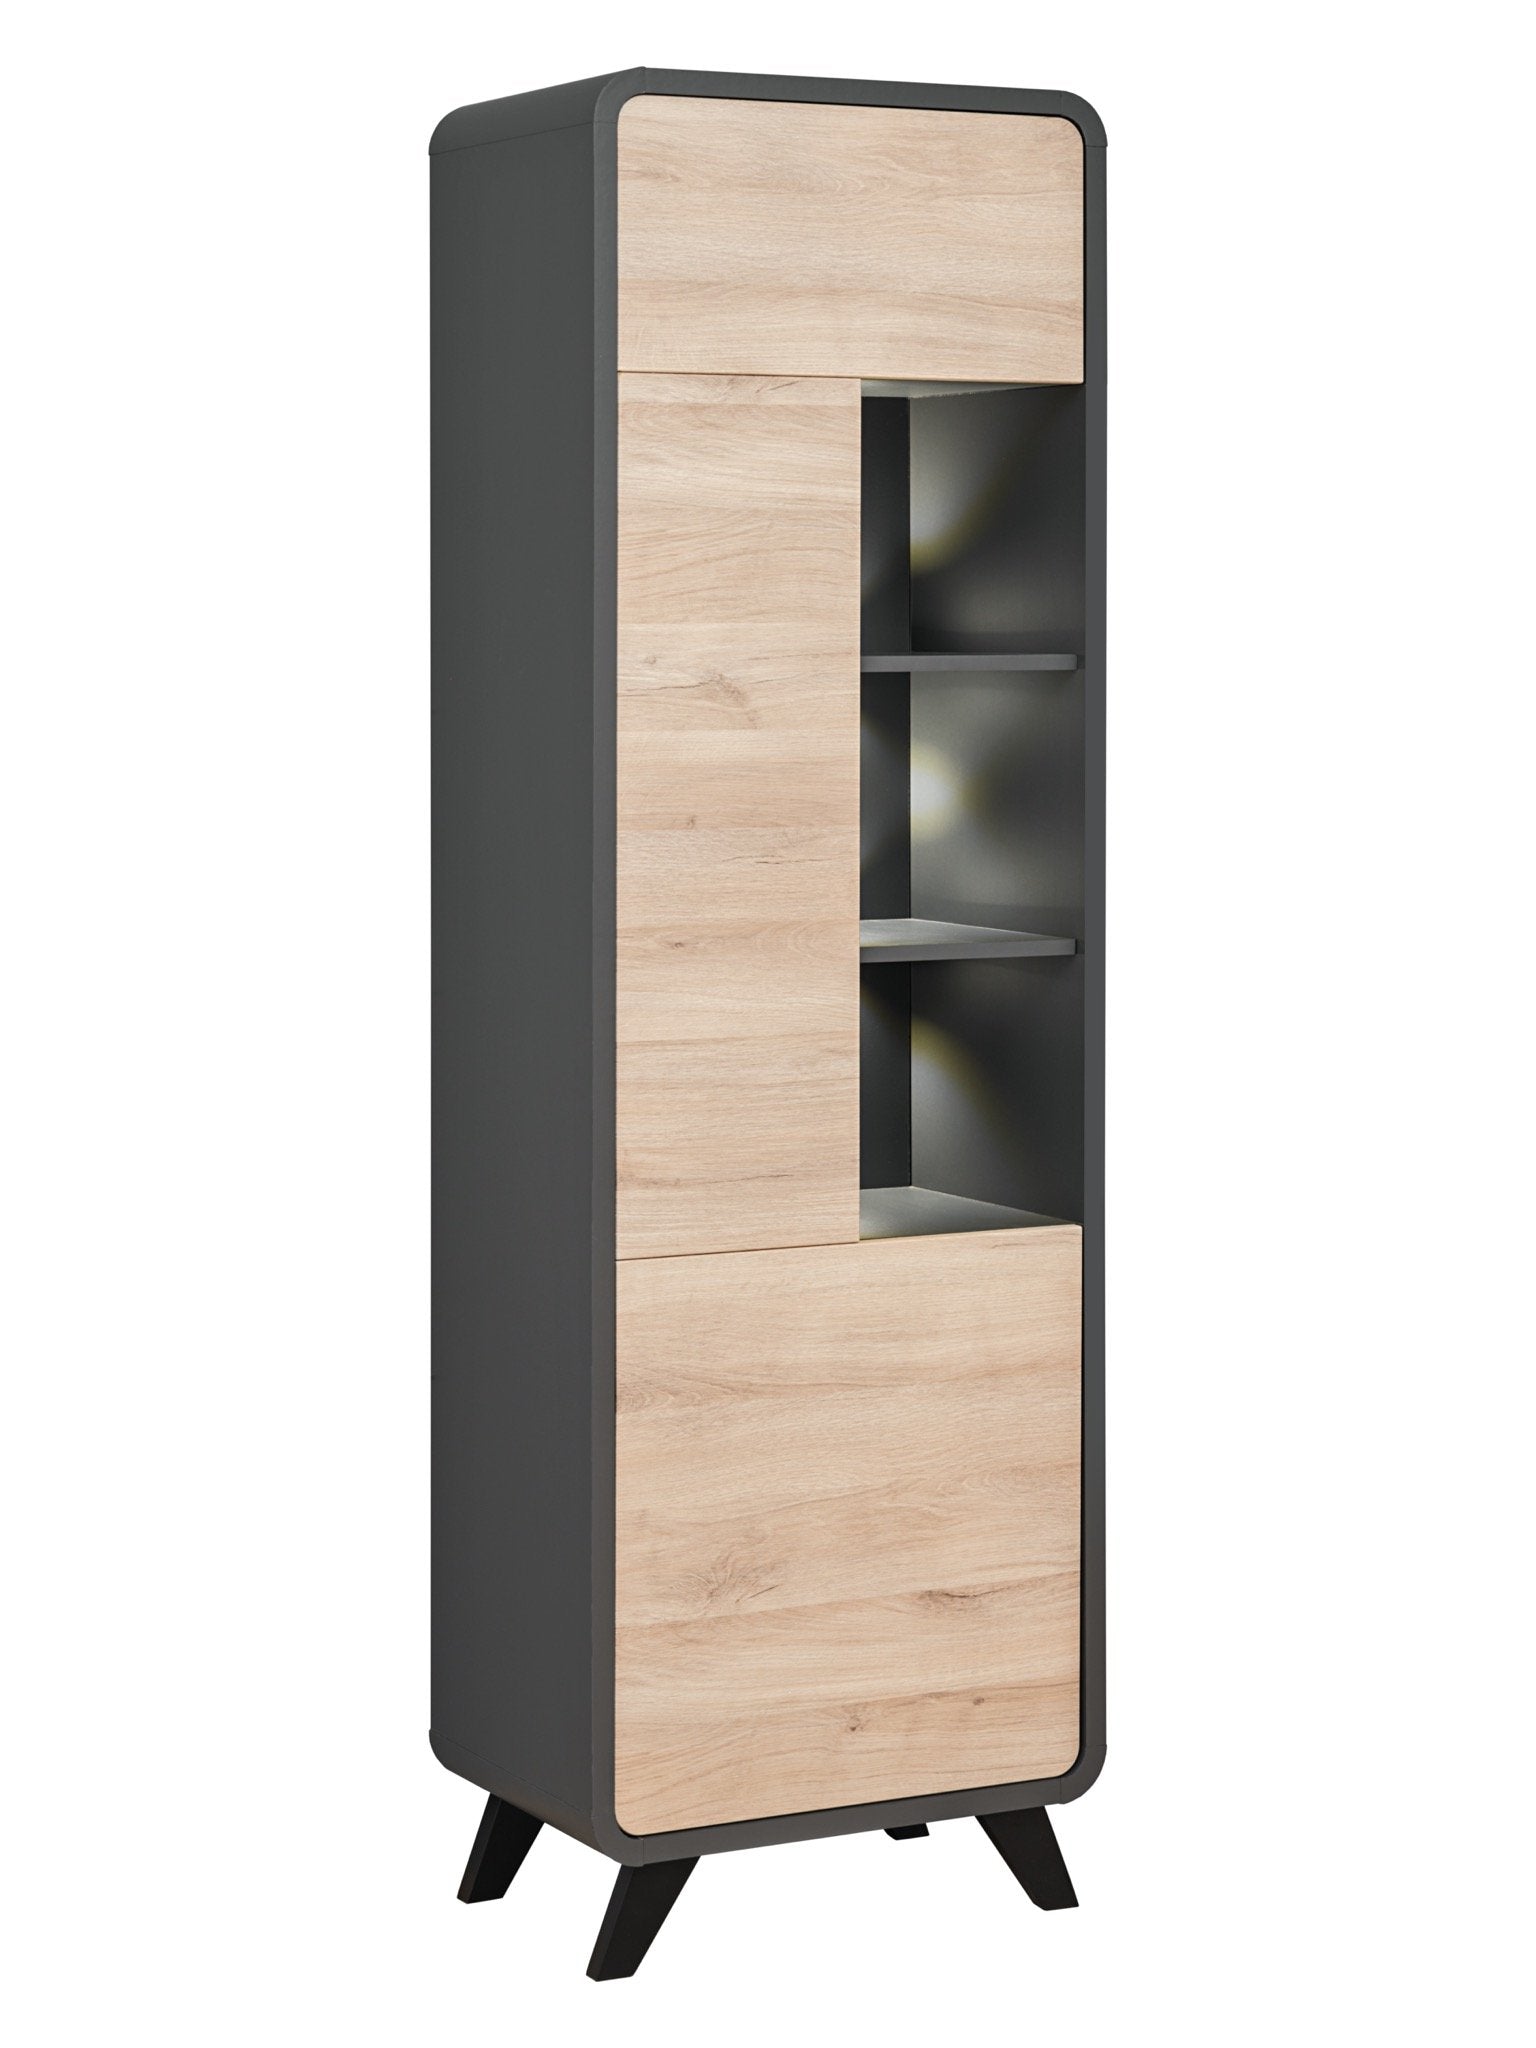 Round Tall Cabinet - £396.0 - Tall Cabinet 